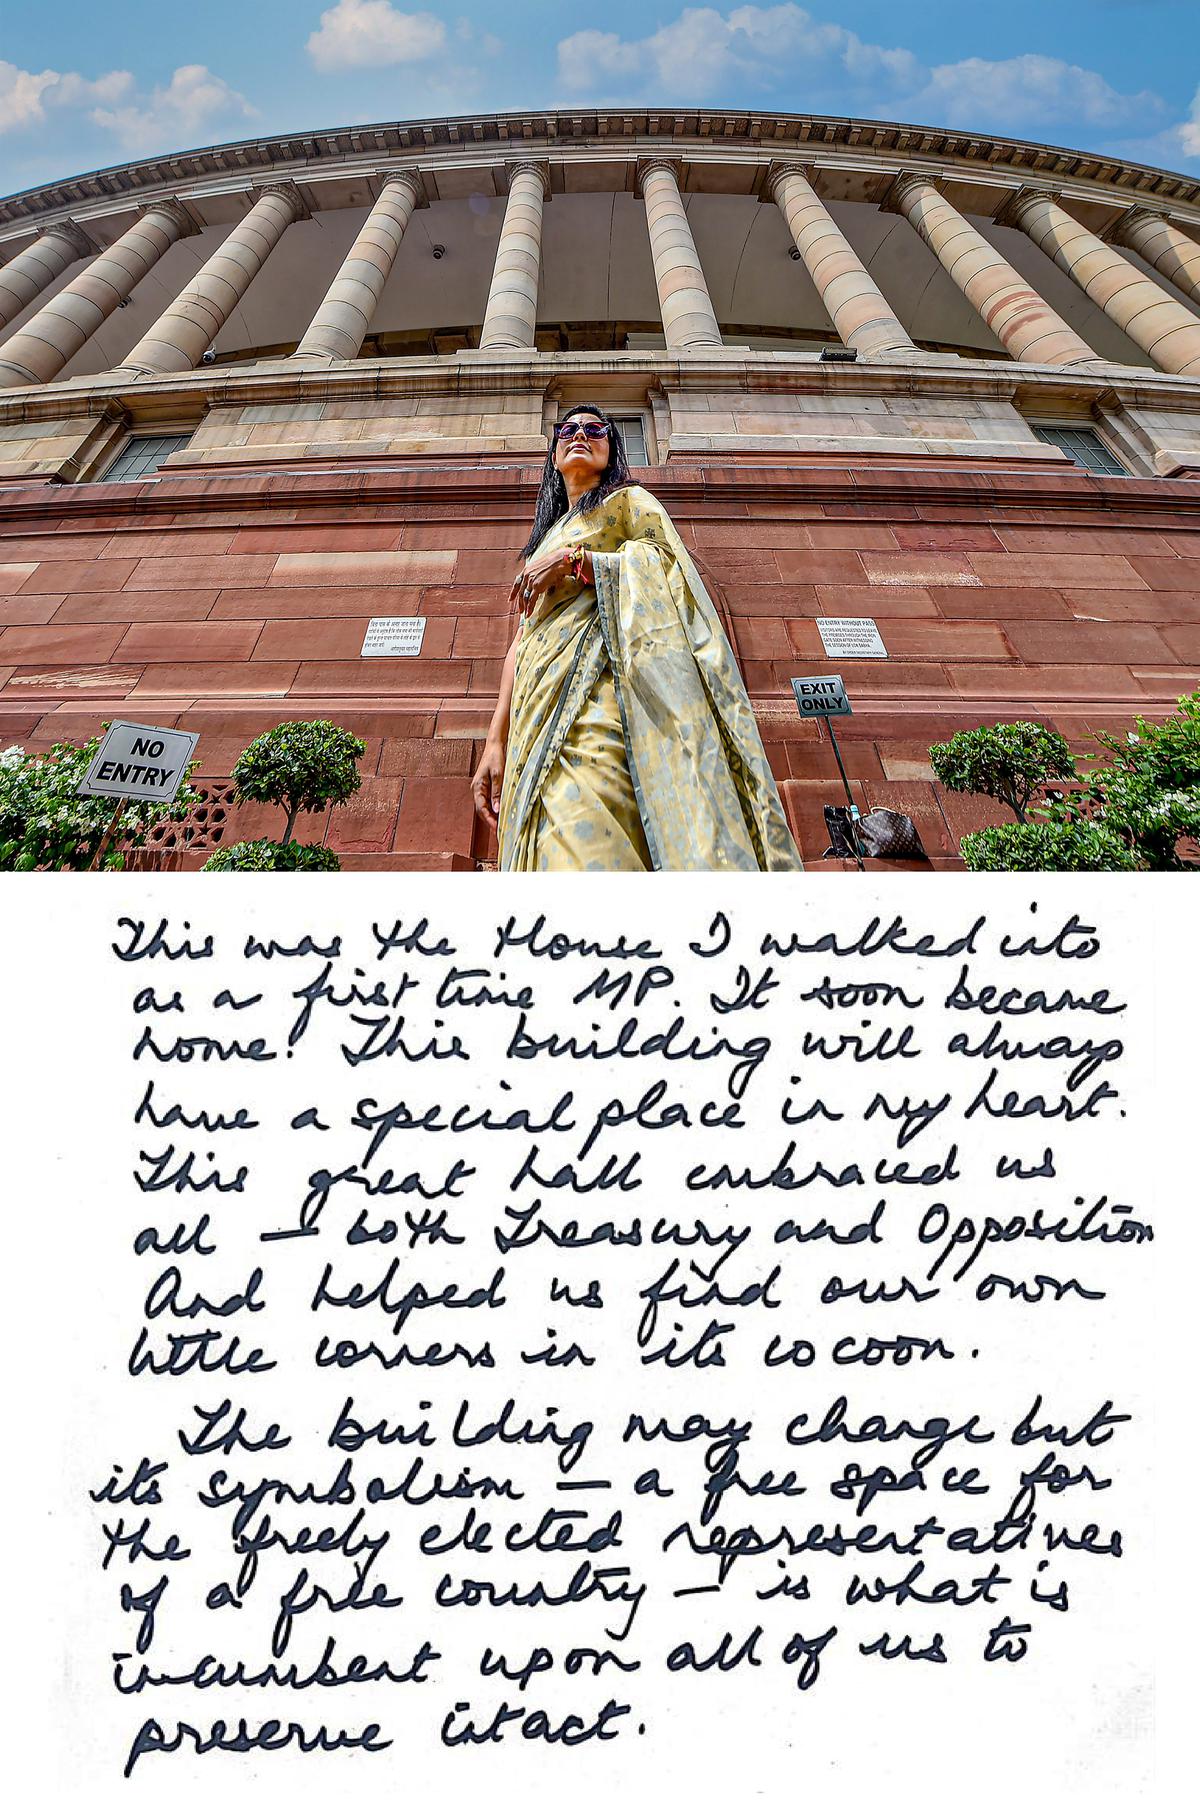 Trinamool Congress (TMC) MP of the Lok Sabha Mahua Moitra poses for a photograph in the backdrop of pillars of the old Parliament House in New Delhi.  Moitra recounts her memories of the old Parliament